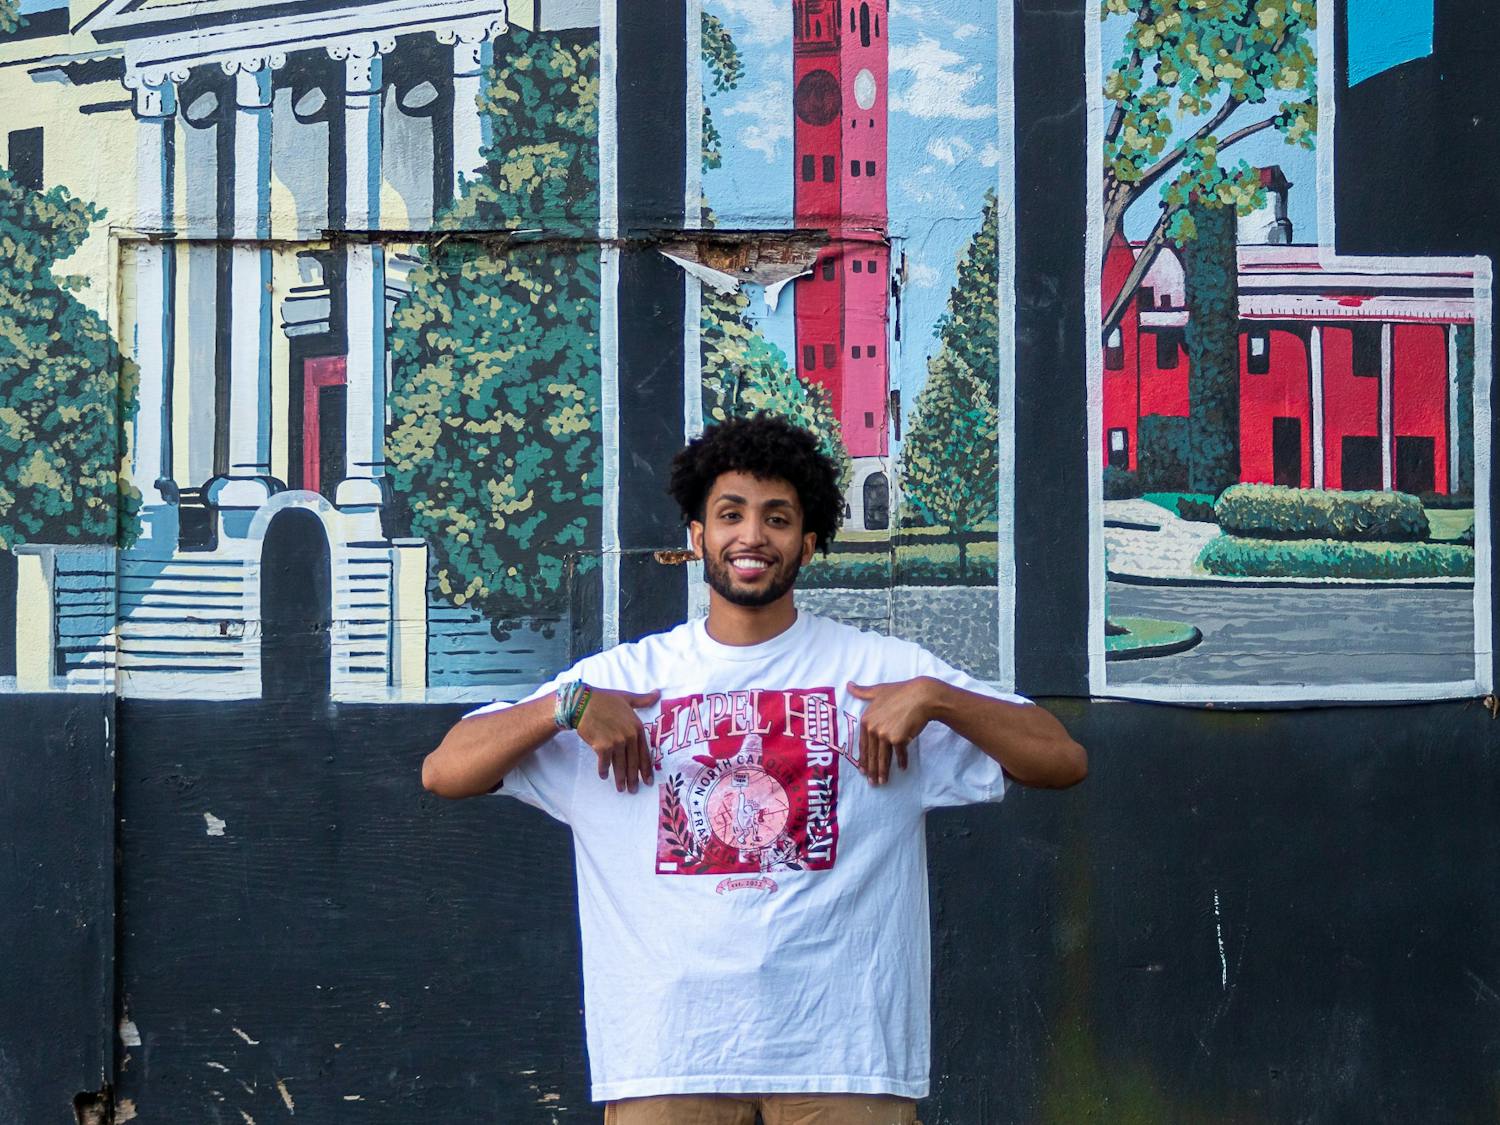 Eliam Mussie, the co-president of the Black Entrepreneur Initiative, pictured in front of the "Greetings from Chapel Hill" mural on Rosemary Street in Chapel Hill, N.C. on Tuesday, Sept. 6, 2022. Mussie is wearing a shirt from his clothing brand, Franklin Street Market, which will be represented at the pop-up this coming Saturday, Sept. 10, 2022.